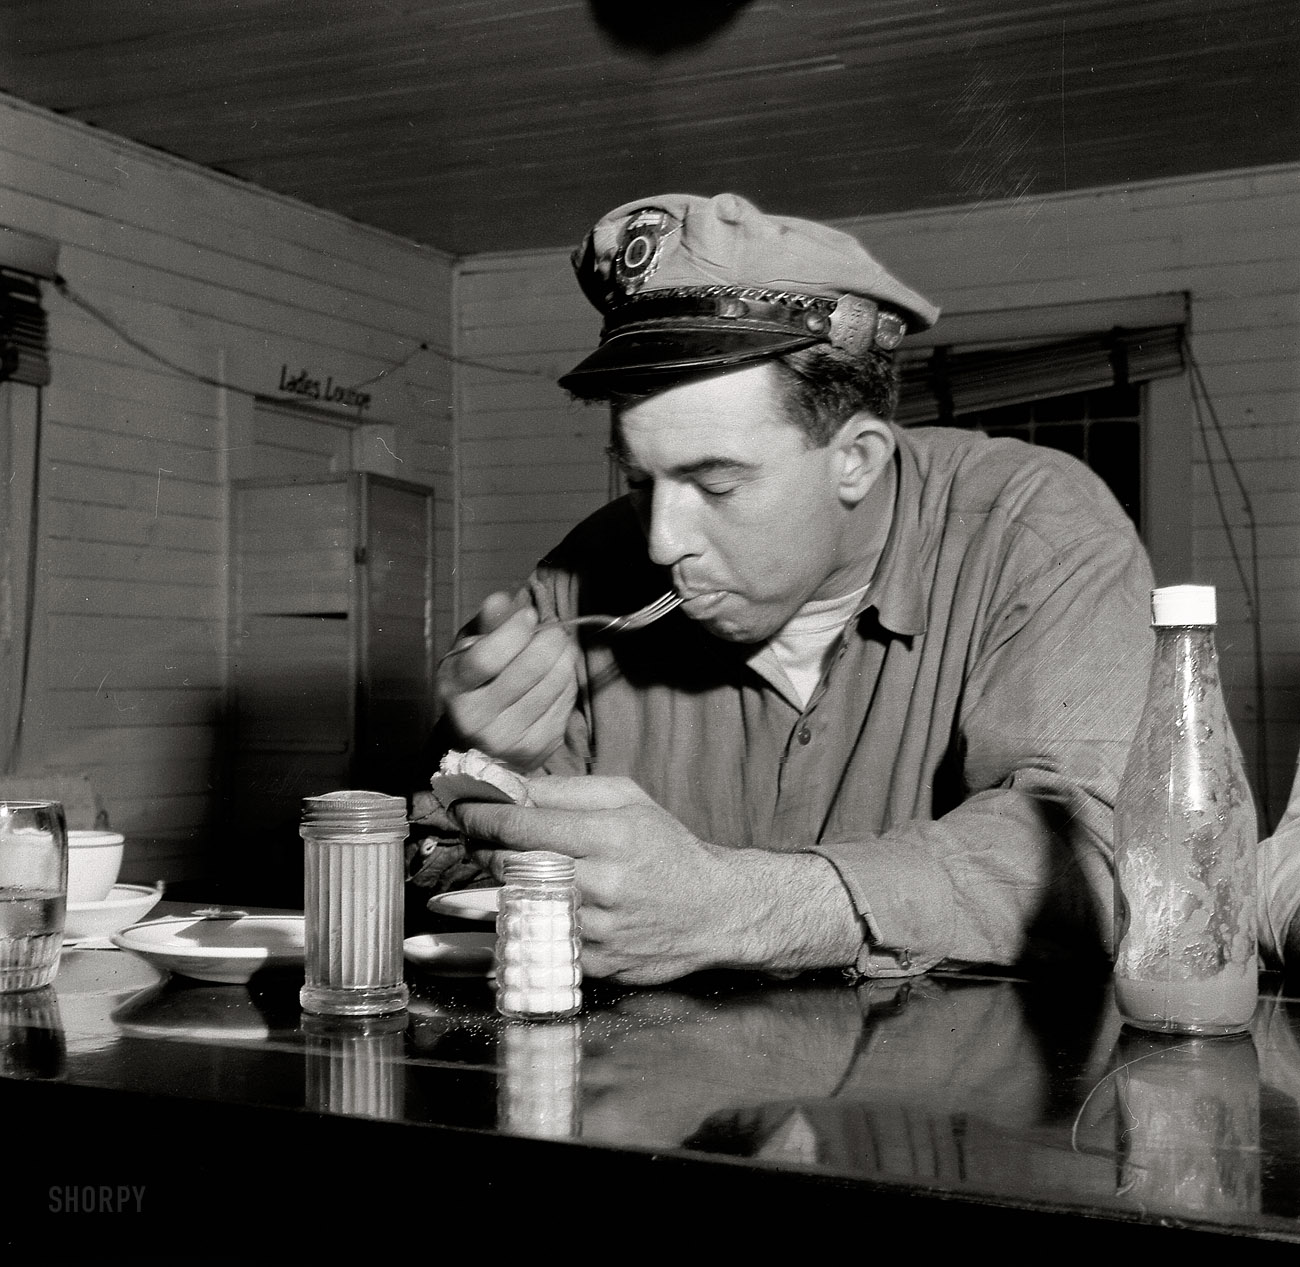 March 1943. "Pearlington, Mississippi (vicinity). Truck driver eating at a trucker's stop along U.S. Highway 90." Hey buddy, pass the salt? Medium-format nitrate negative by John Vachon for the Office of War Information. View full size.